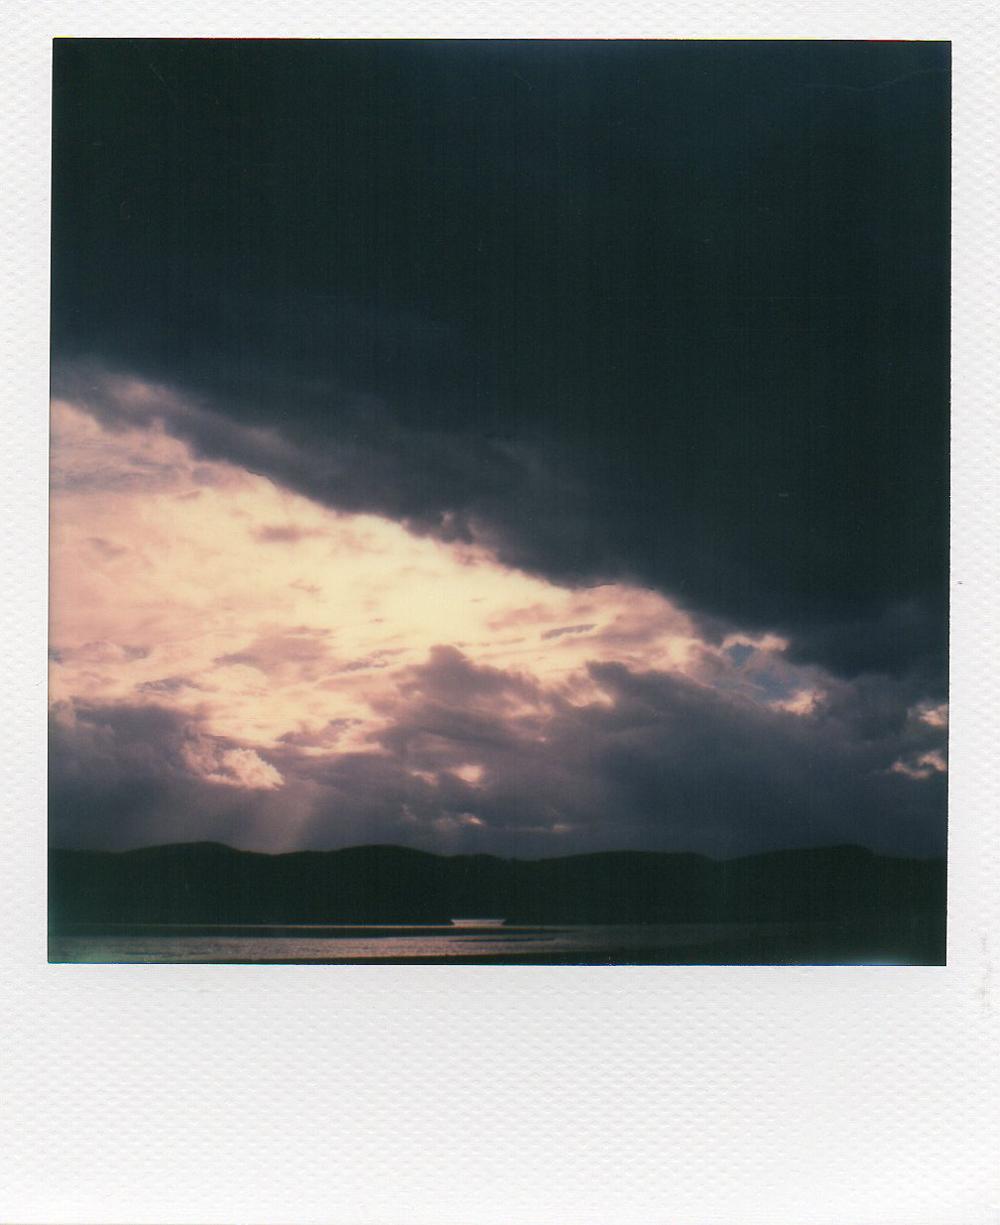 SkyScapes 3 | SX70 | Impossible Project Film | Lusy Incera Bustio